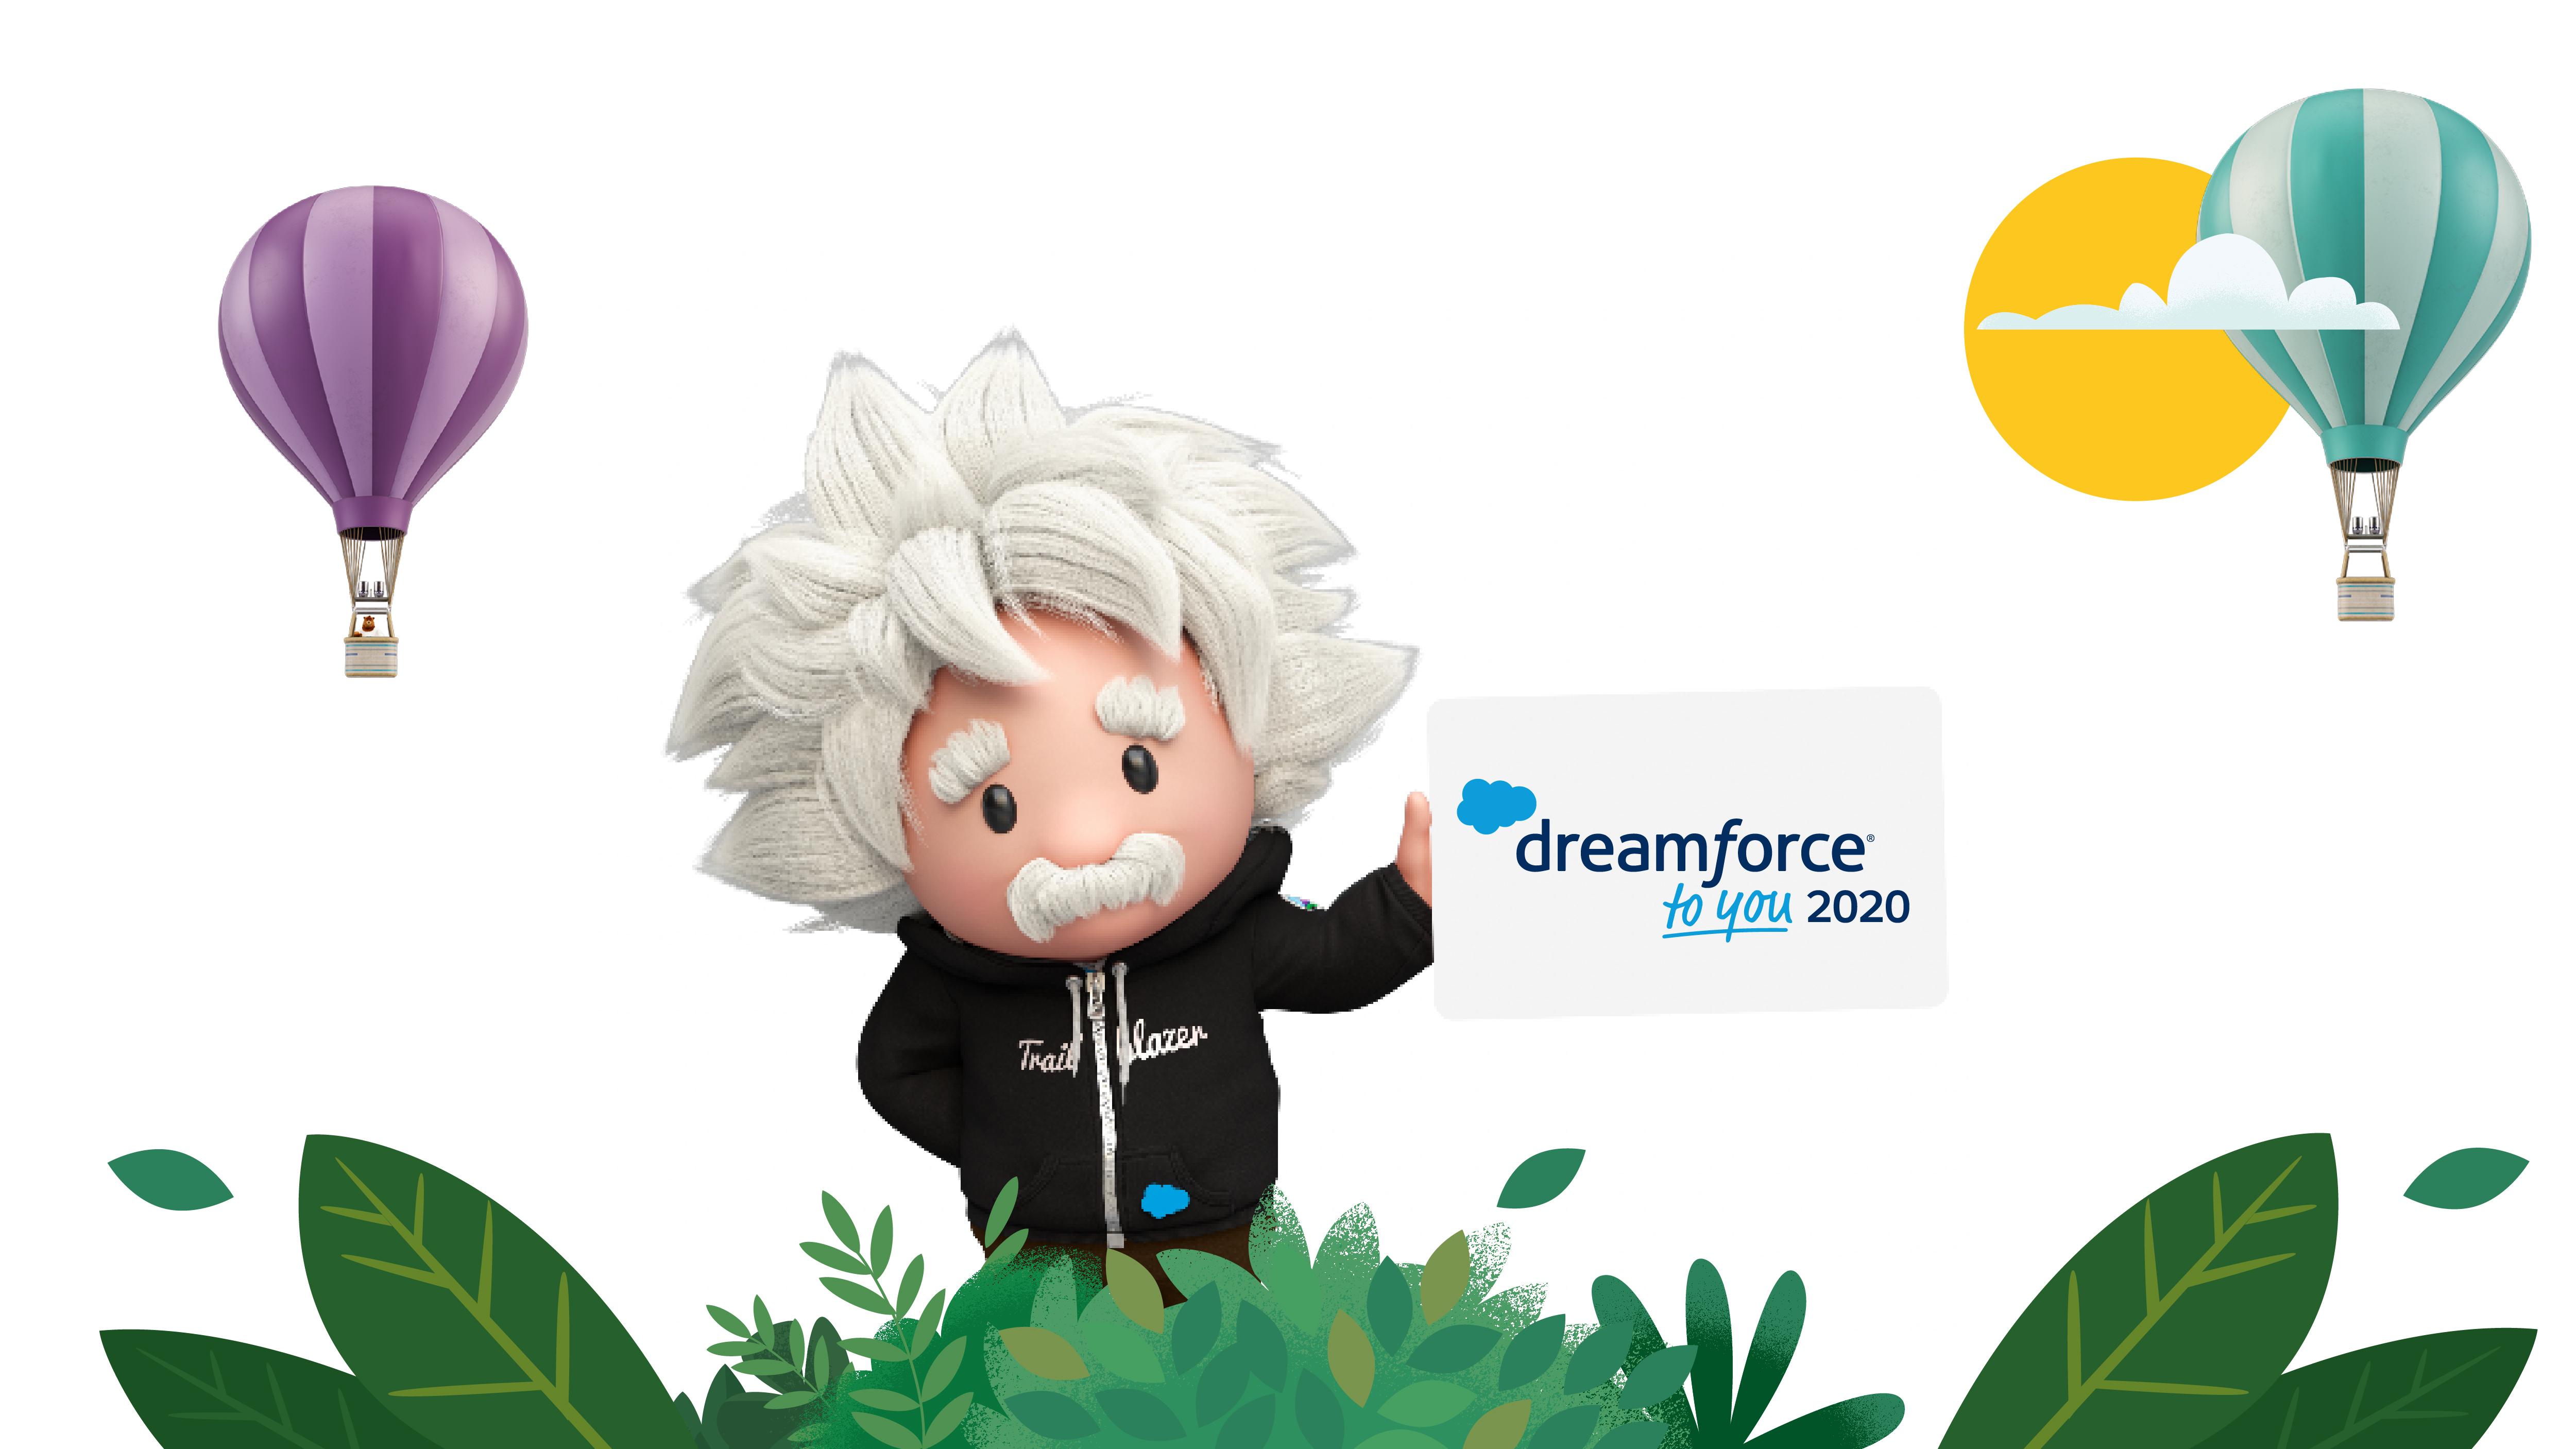 What is Dreamforce to You 2020? - Salesforce News